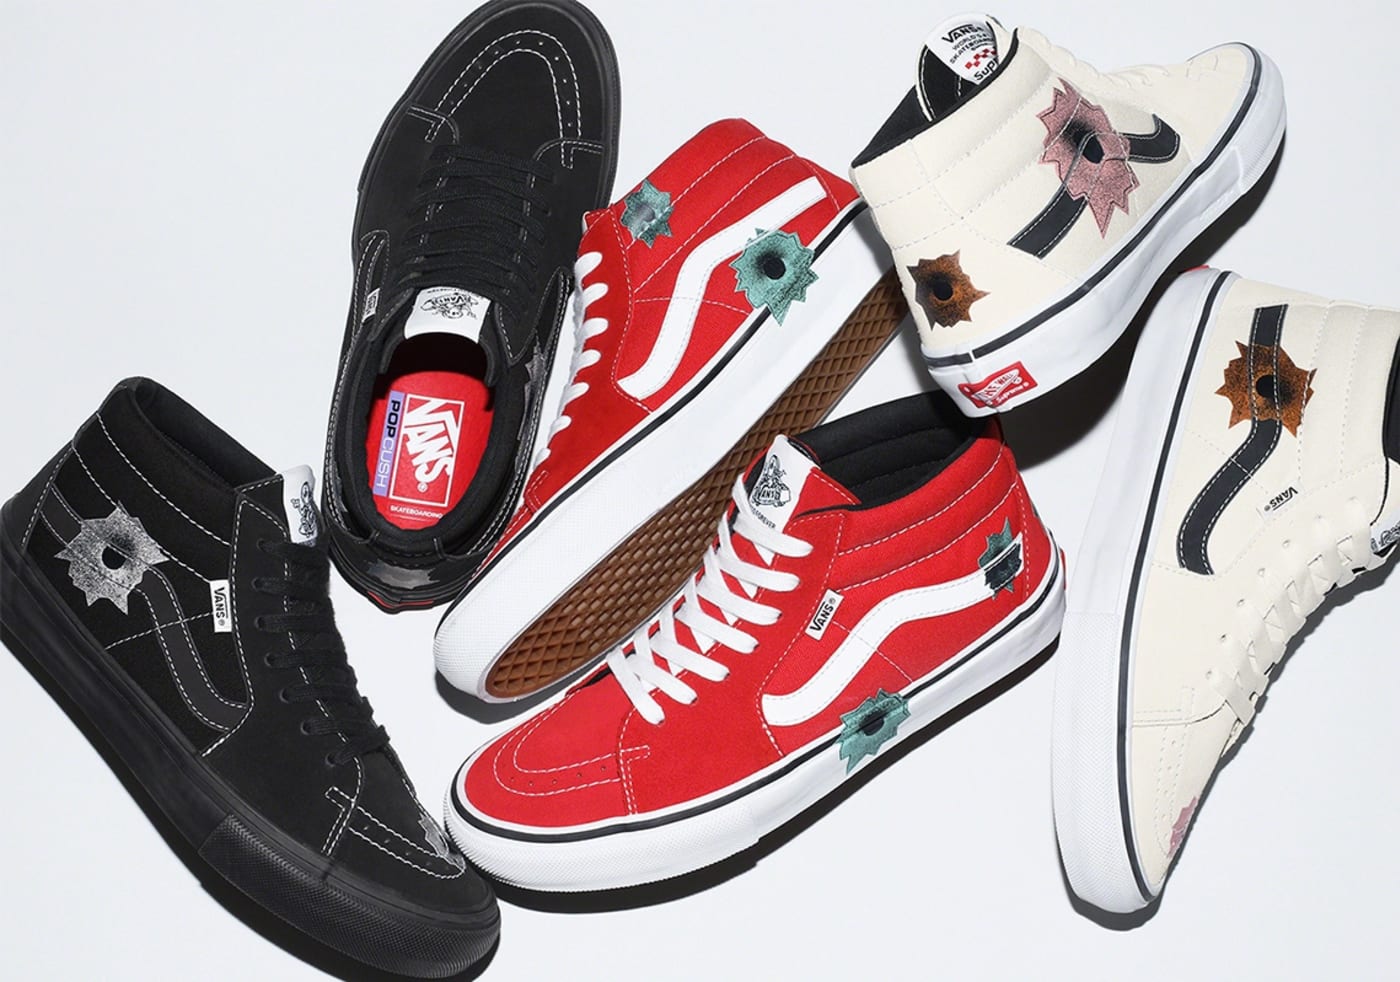 Daggry solid Distrahere Supreme Vans Nate Lowman Bullet Hole Sneakers Release Cancelled | Complex